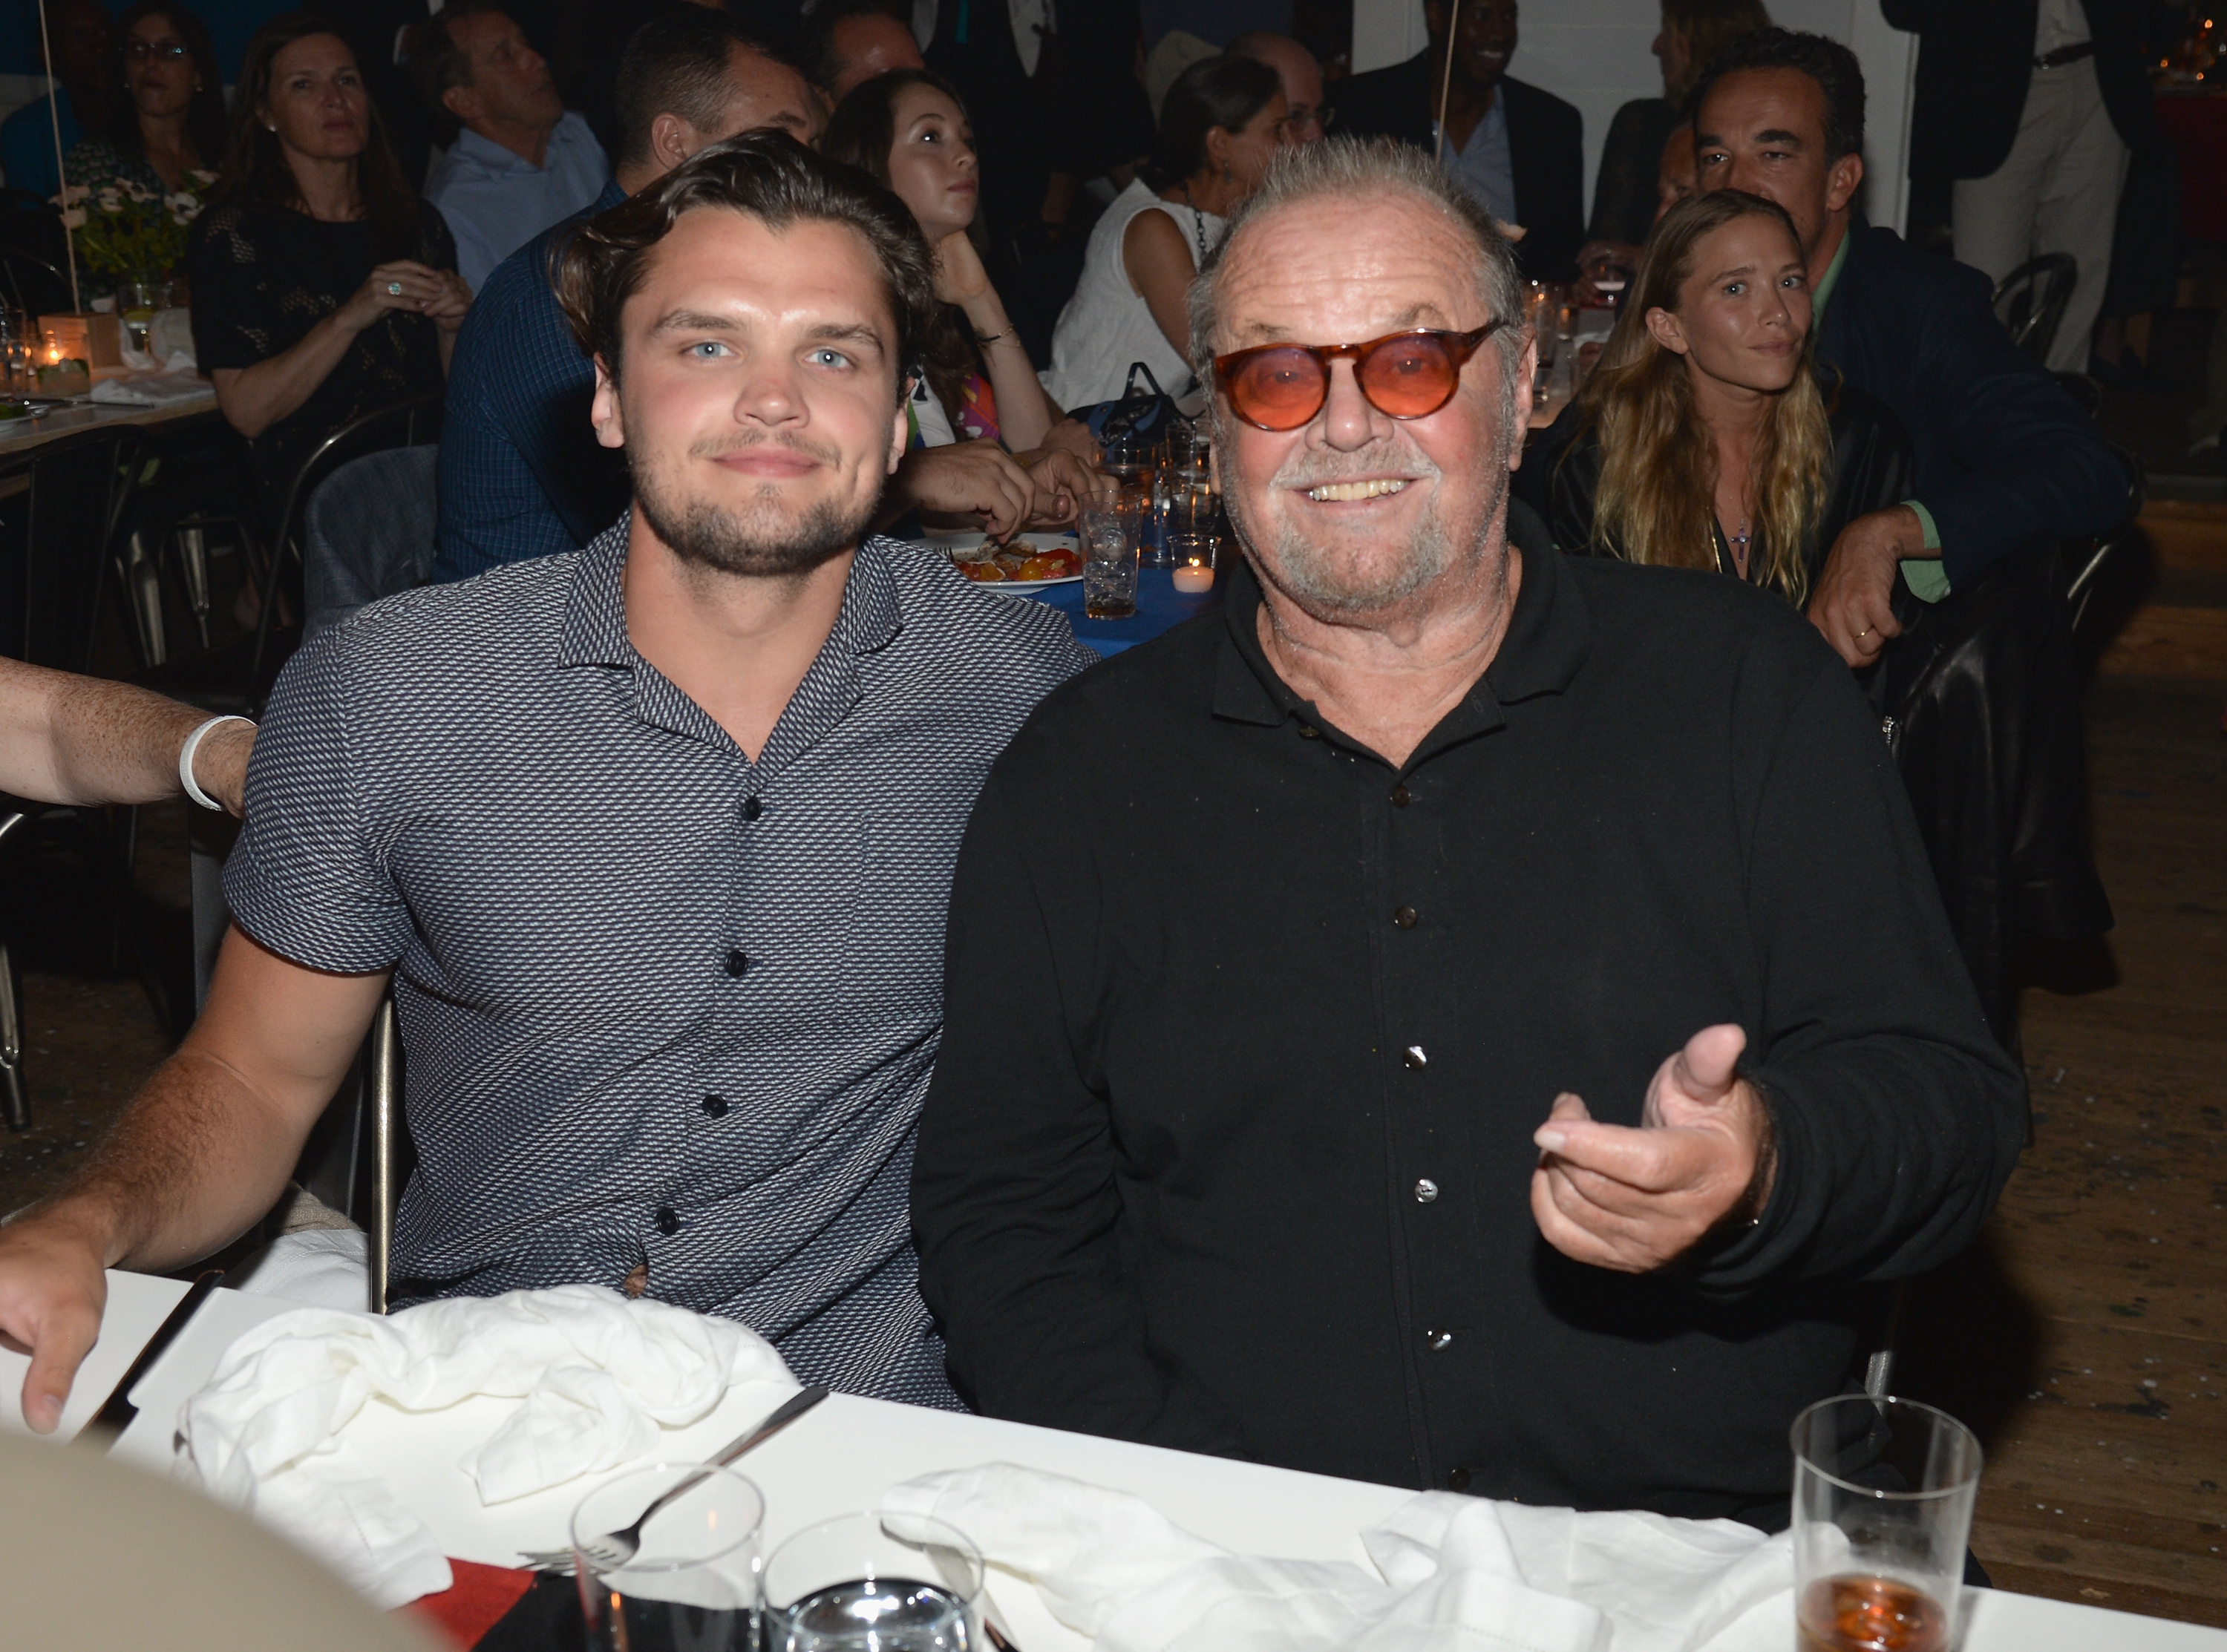 Ray Nicholson and Jack Nicholson attends Apollo in the Hamptons 2015 at The Creeks on August 15, 2015 in East Hampton, New York.